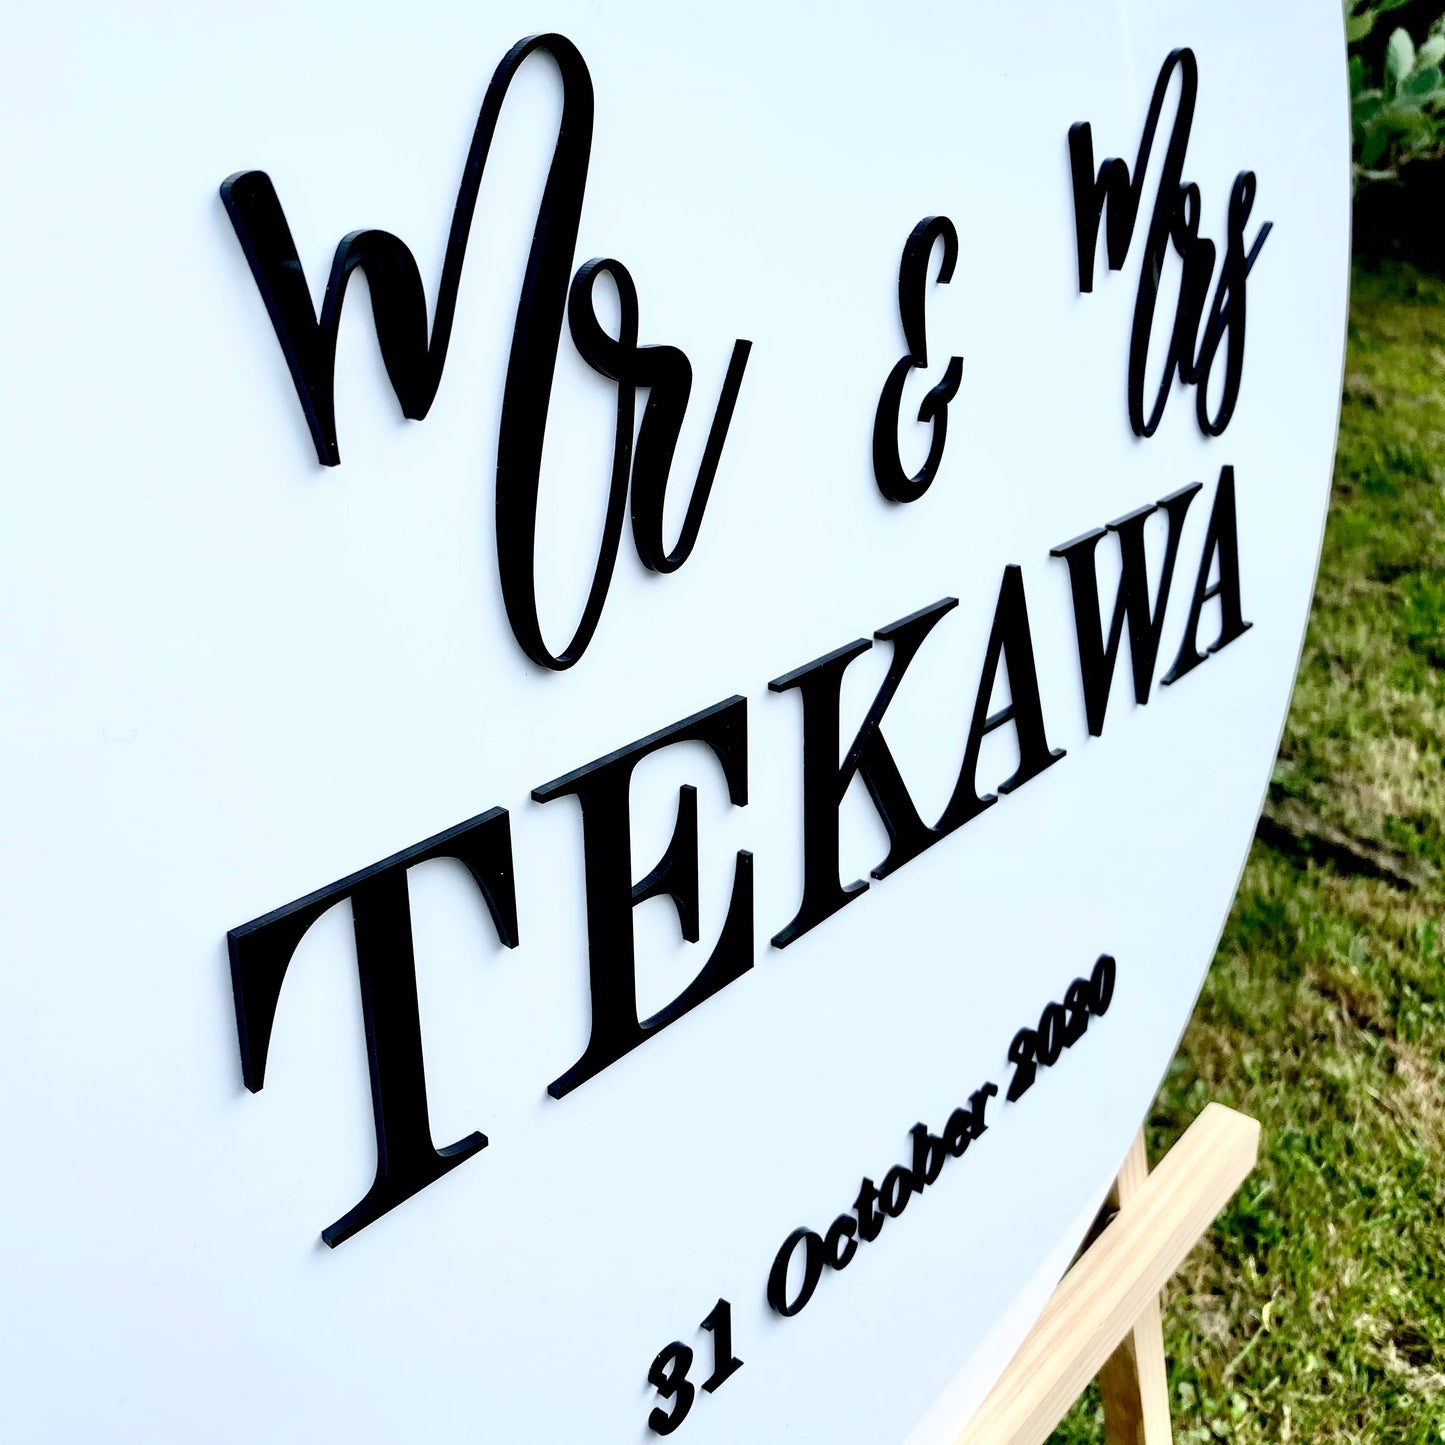 The Sage wedding sign - decal